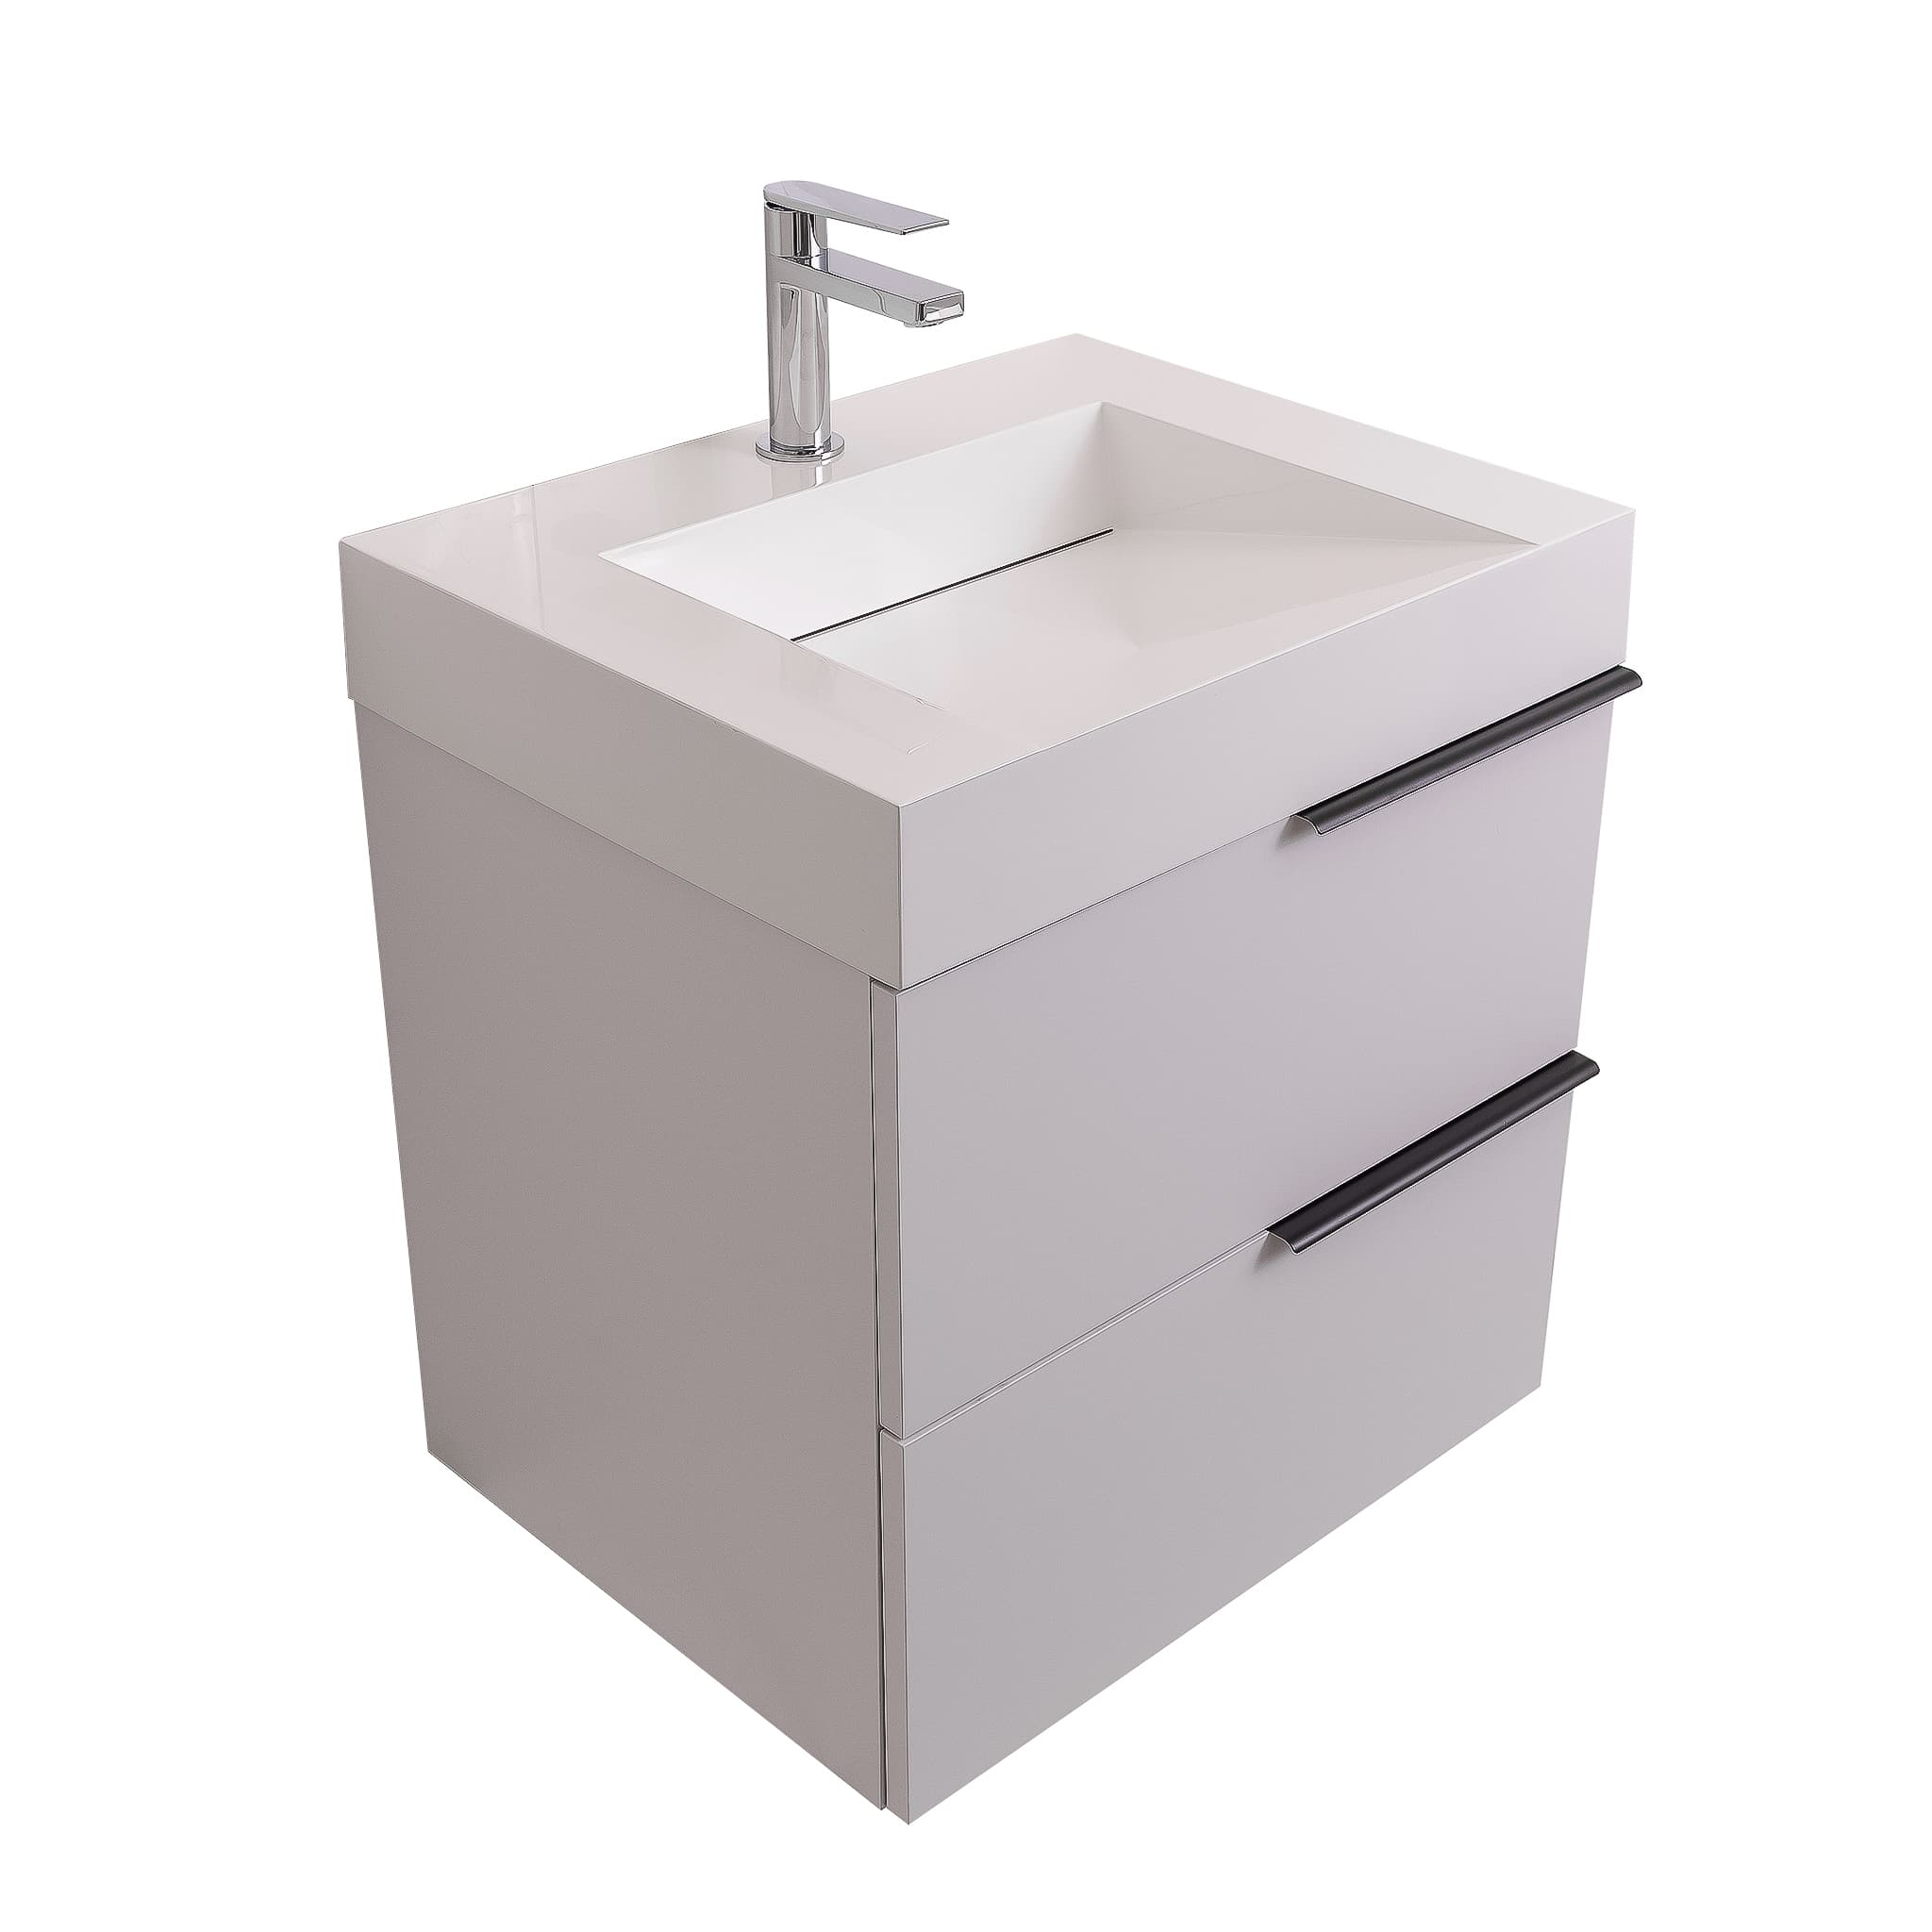 Mallorca 23.5 Matte White Cabinet, Infinity Cultured Marble Sink, Wall Mounted Modern Vanity Set